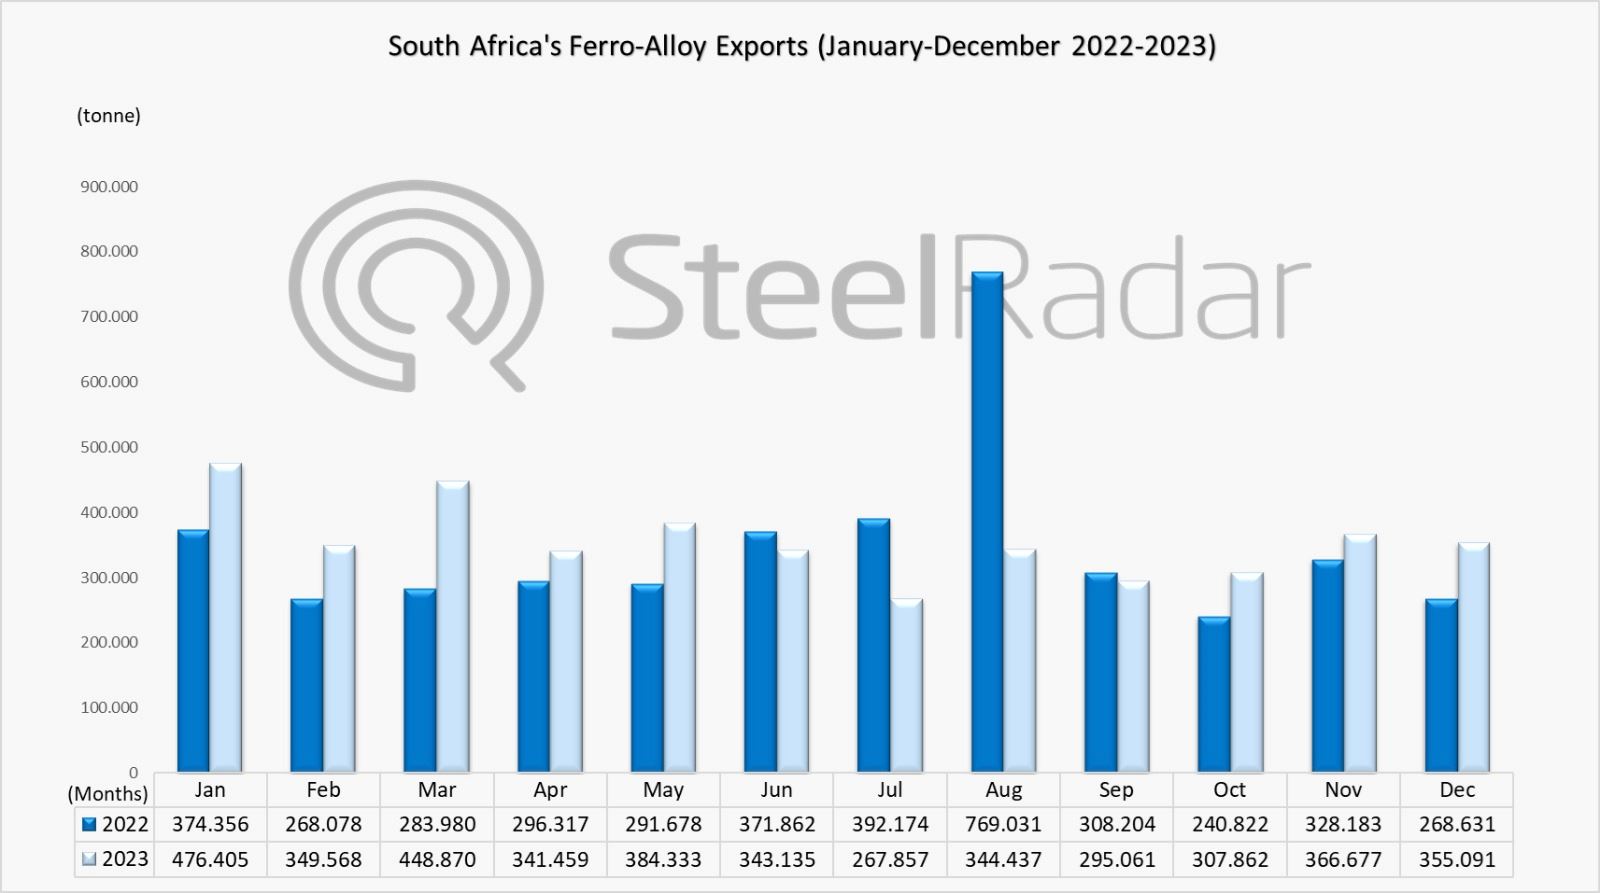 What happened to South Africa's ferro-alloy exports?